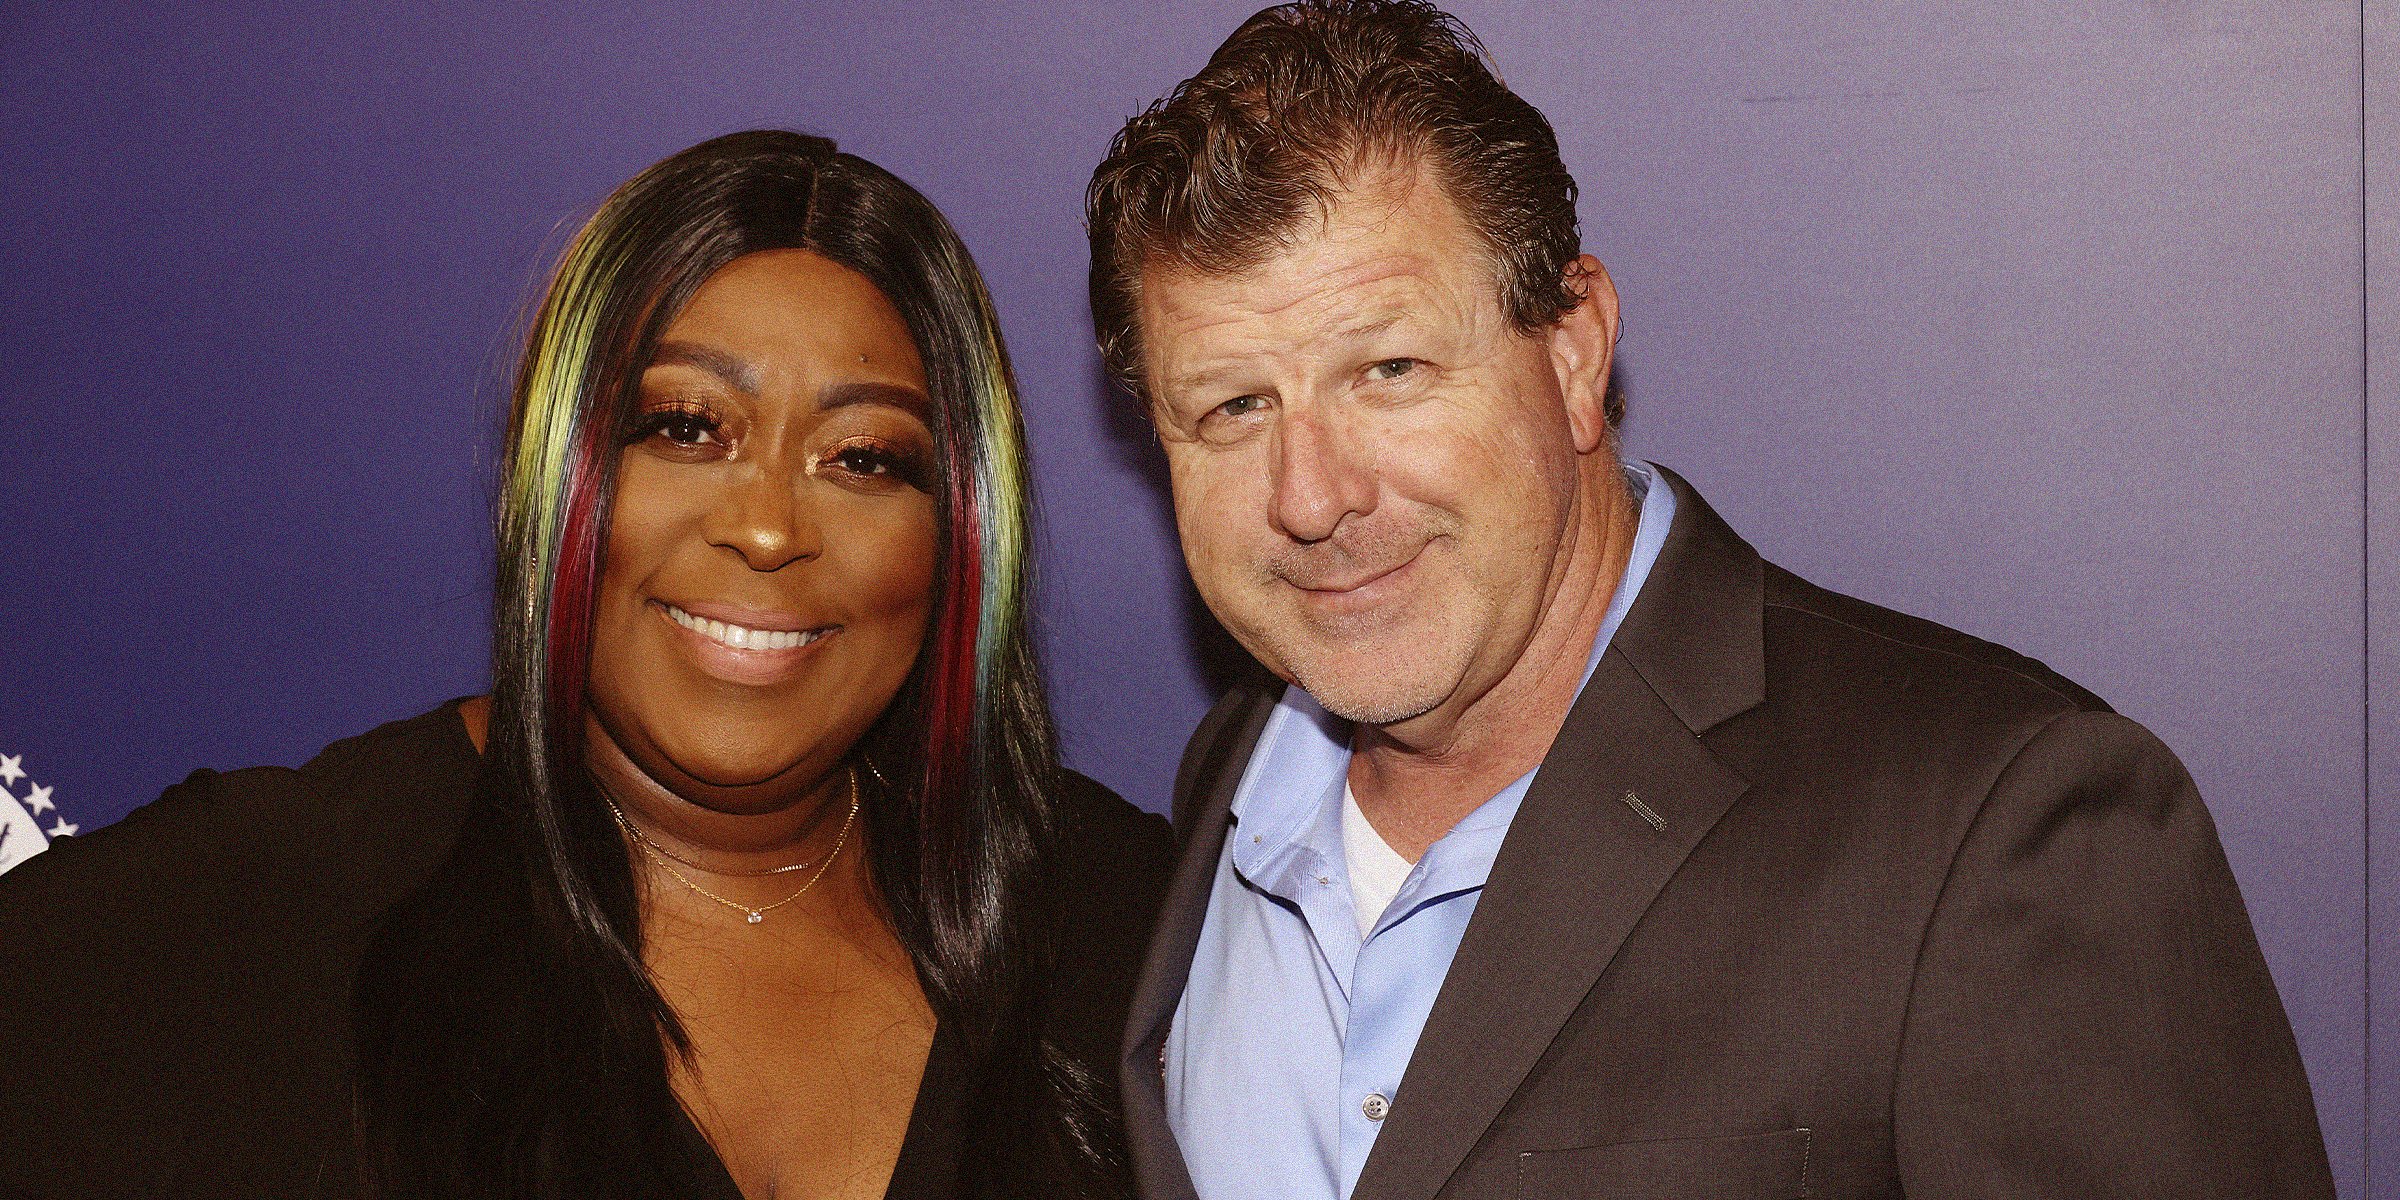 Loni Love and James Welsh, 2022 | Source: Getty Images